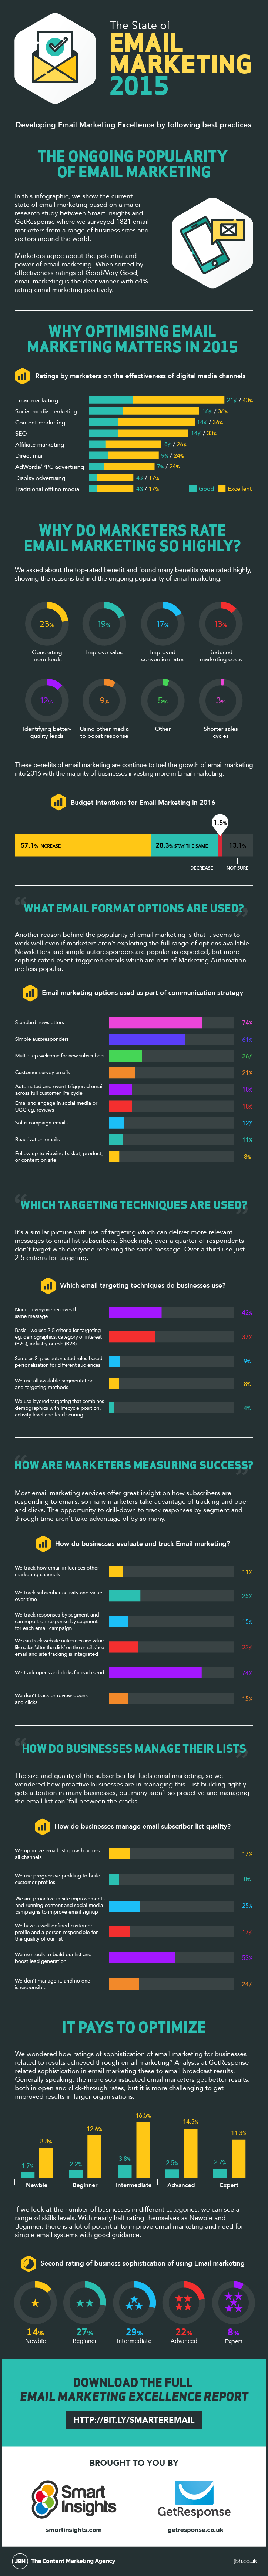 What is the current state of Email Marketing? - #infographic